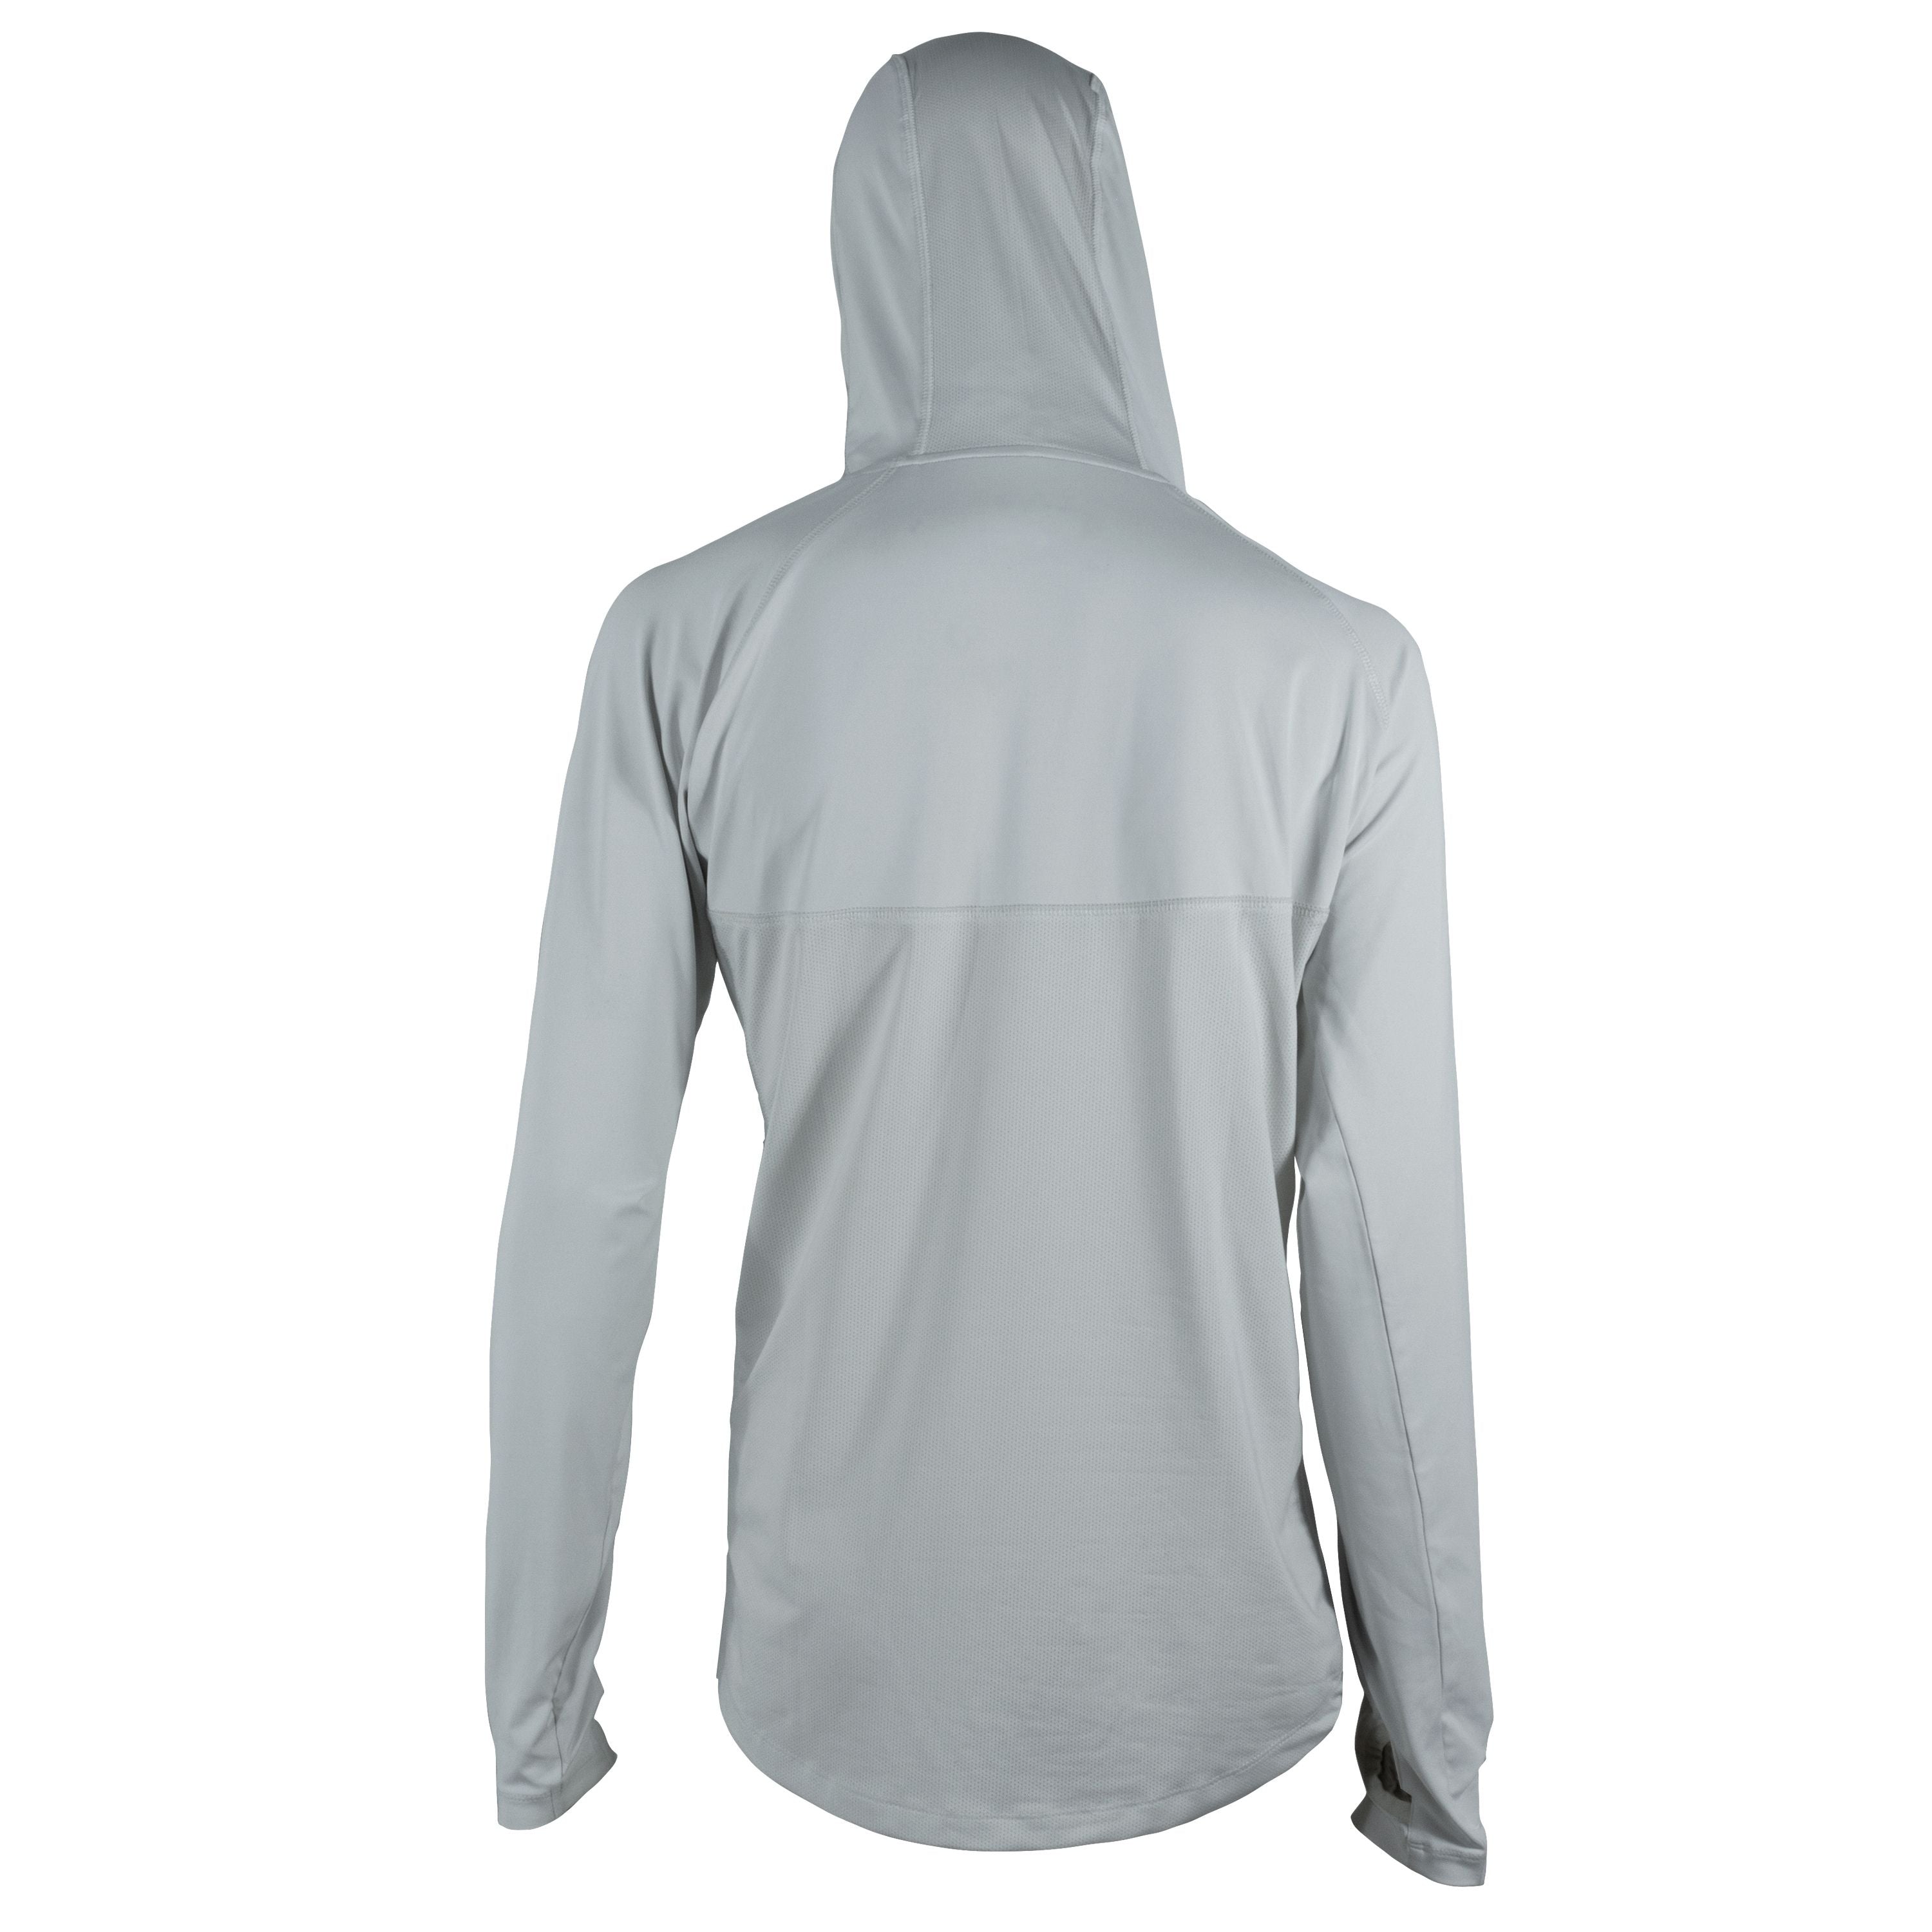 Long sleeves t-shirt with hood - Women's